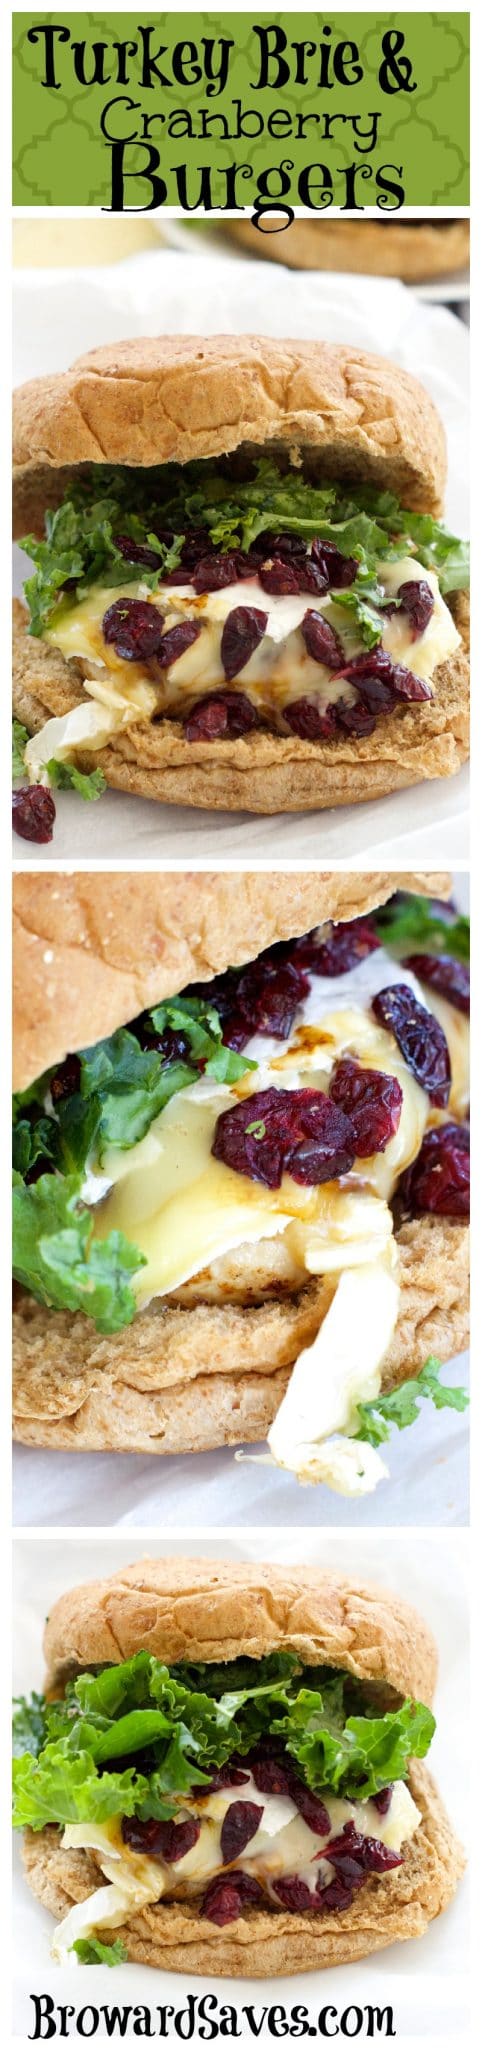 These delicious Turkey Burgers with Brie and cranberry cooks in 15 minutes or less. The perfect gourmet burger recipe to enjoy for lunch or dinner. 